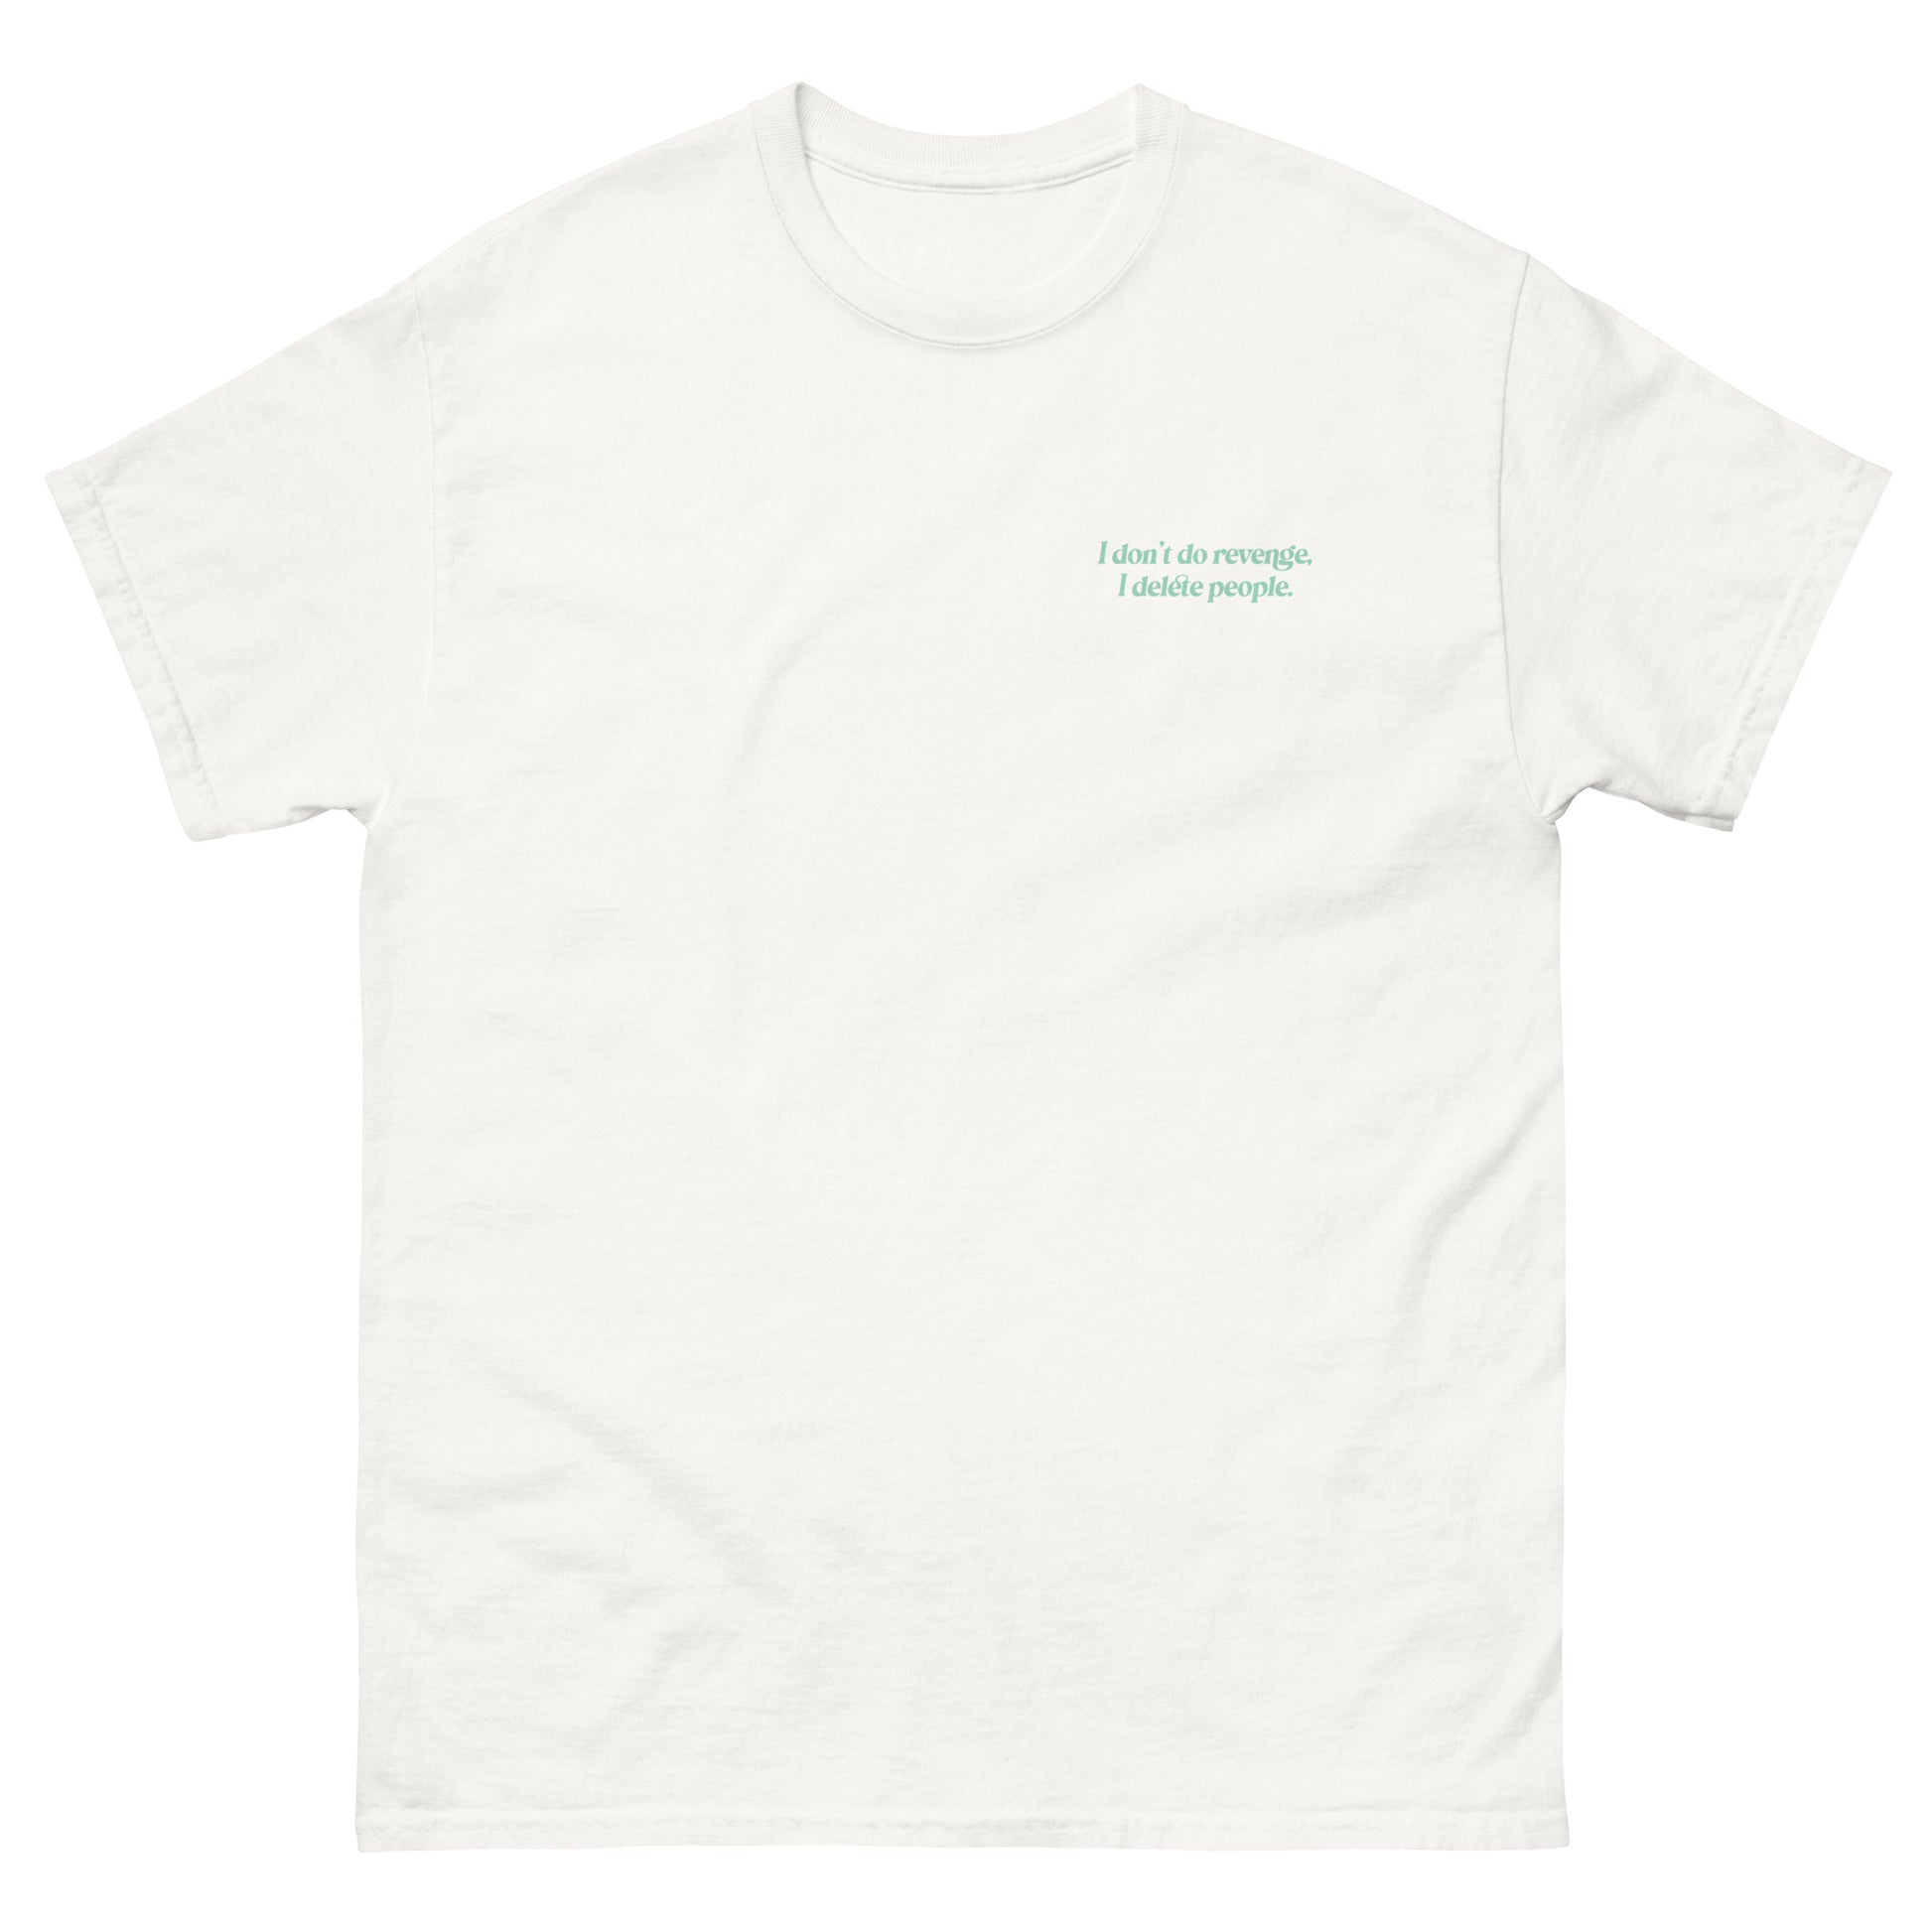 White High Quality Tee - Front Design with "I don't do revenge, I delete people. " print on left chest - Back Design with a Phrase "I don't do revenge, I delete people." print